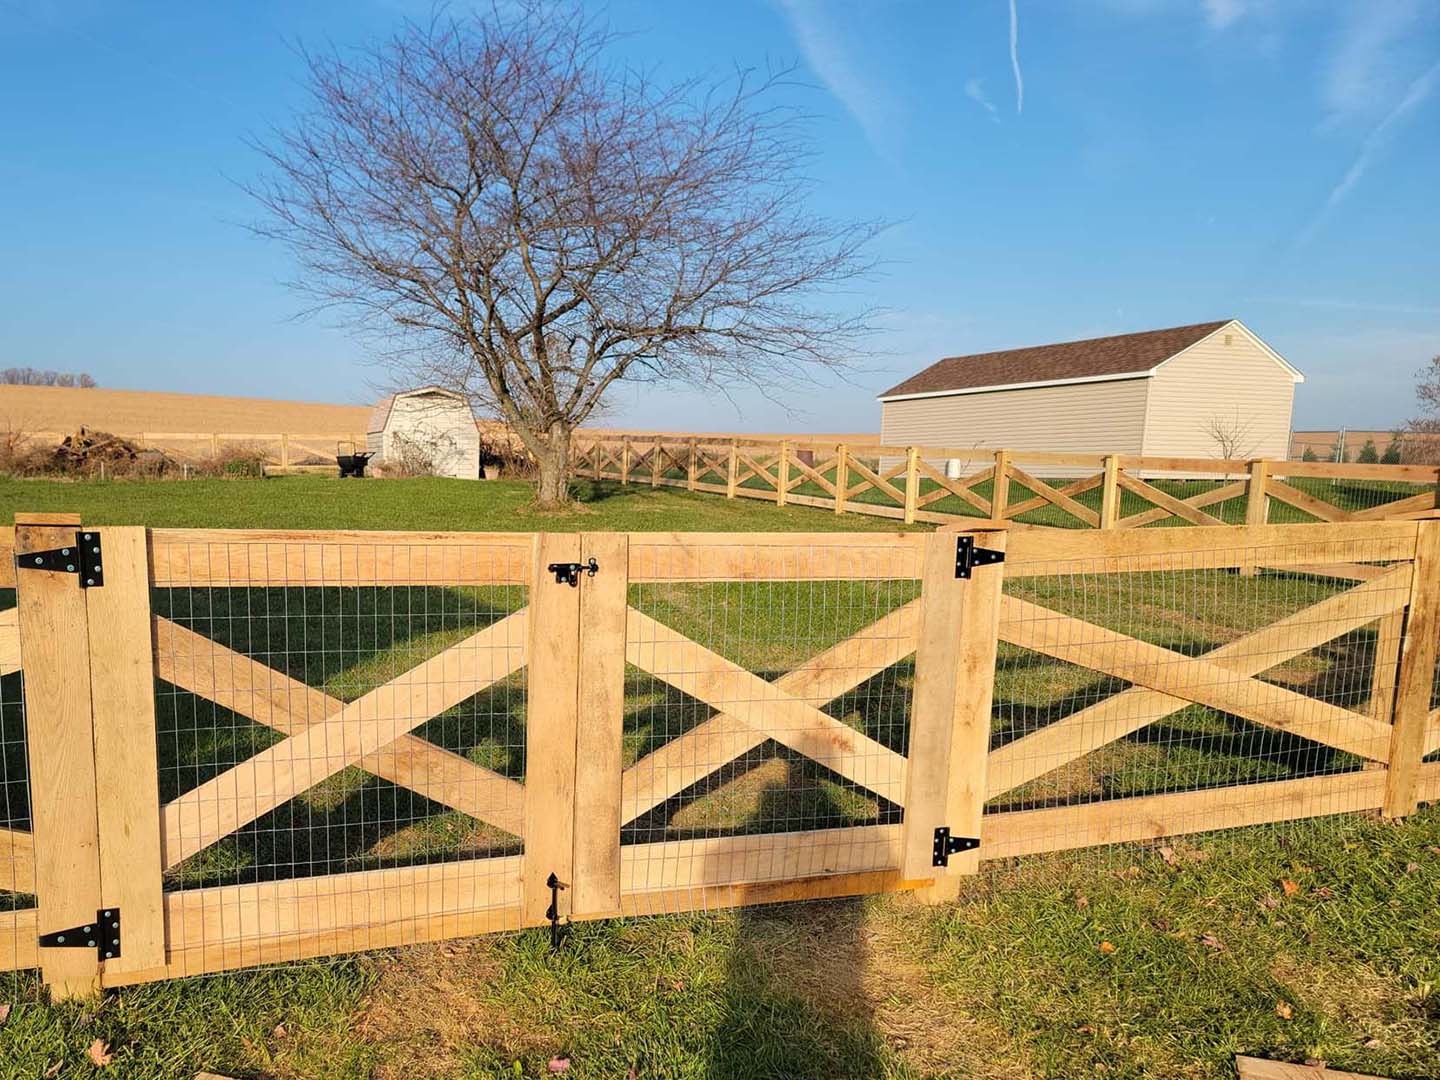 Photo of a farm fence in Lancaster, PA